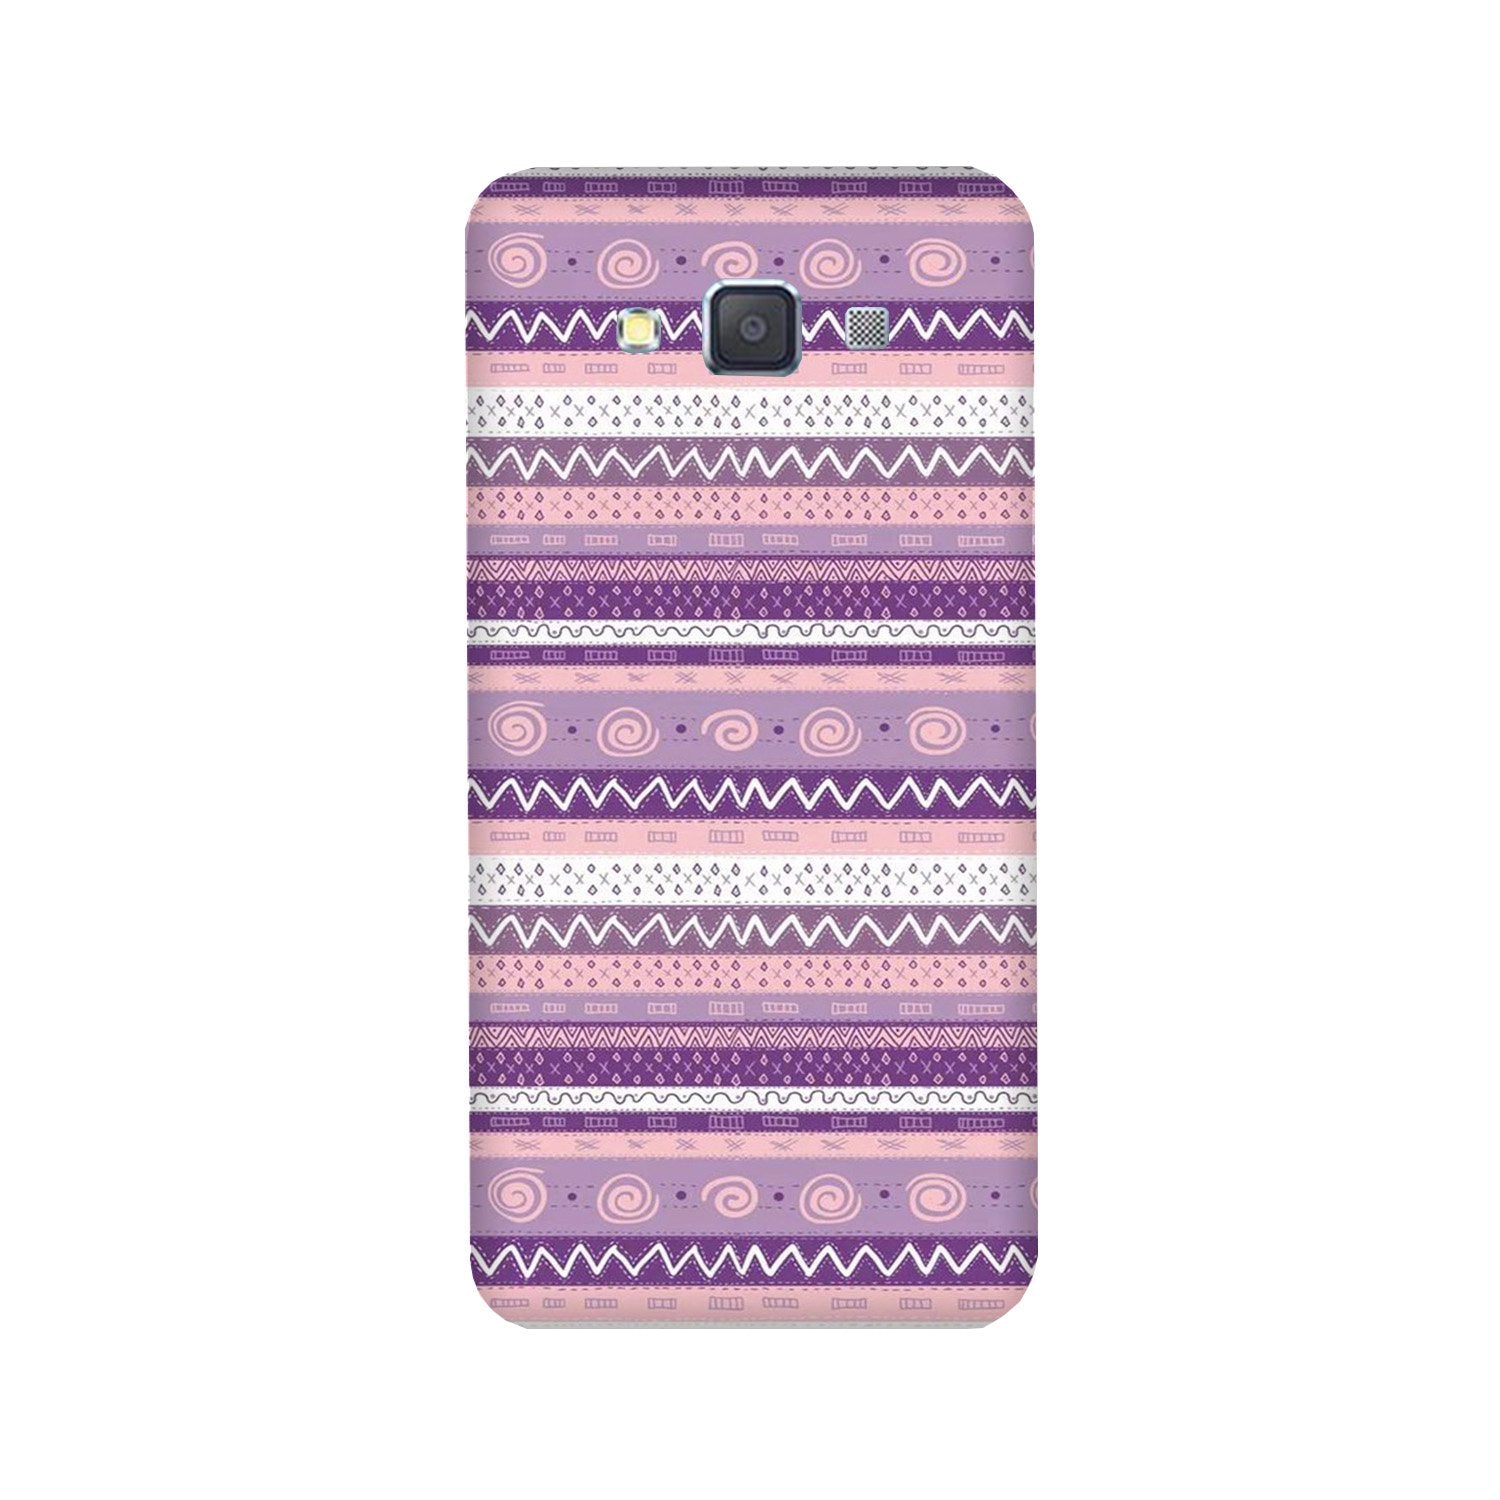 Zigzag line pattern3 Case for Galaxy Grand Max